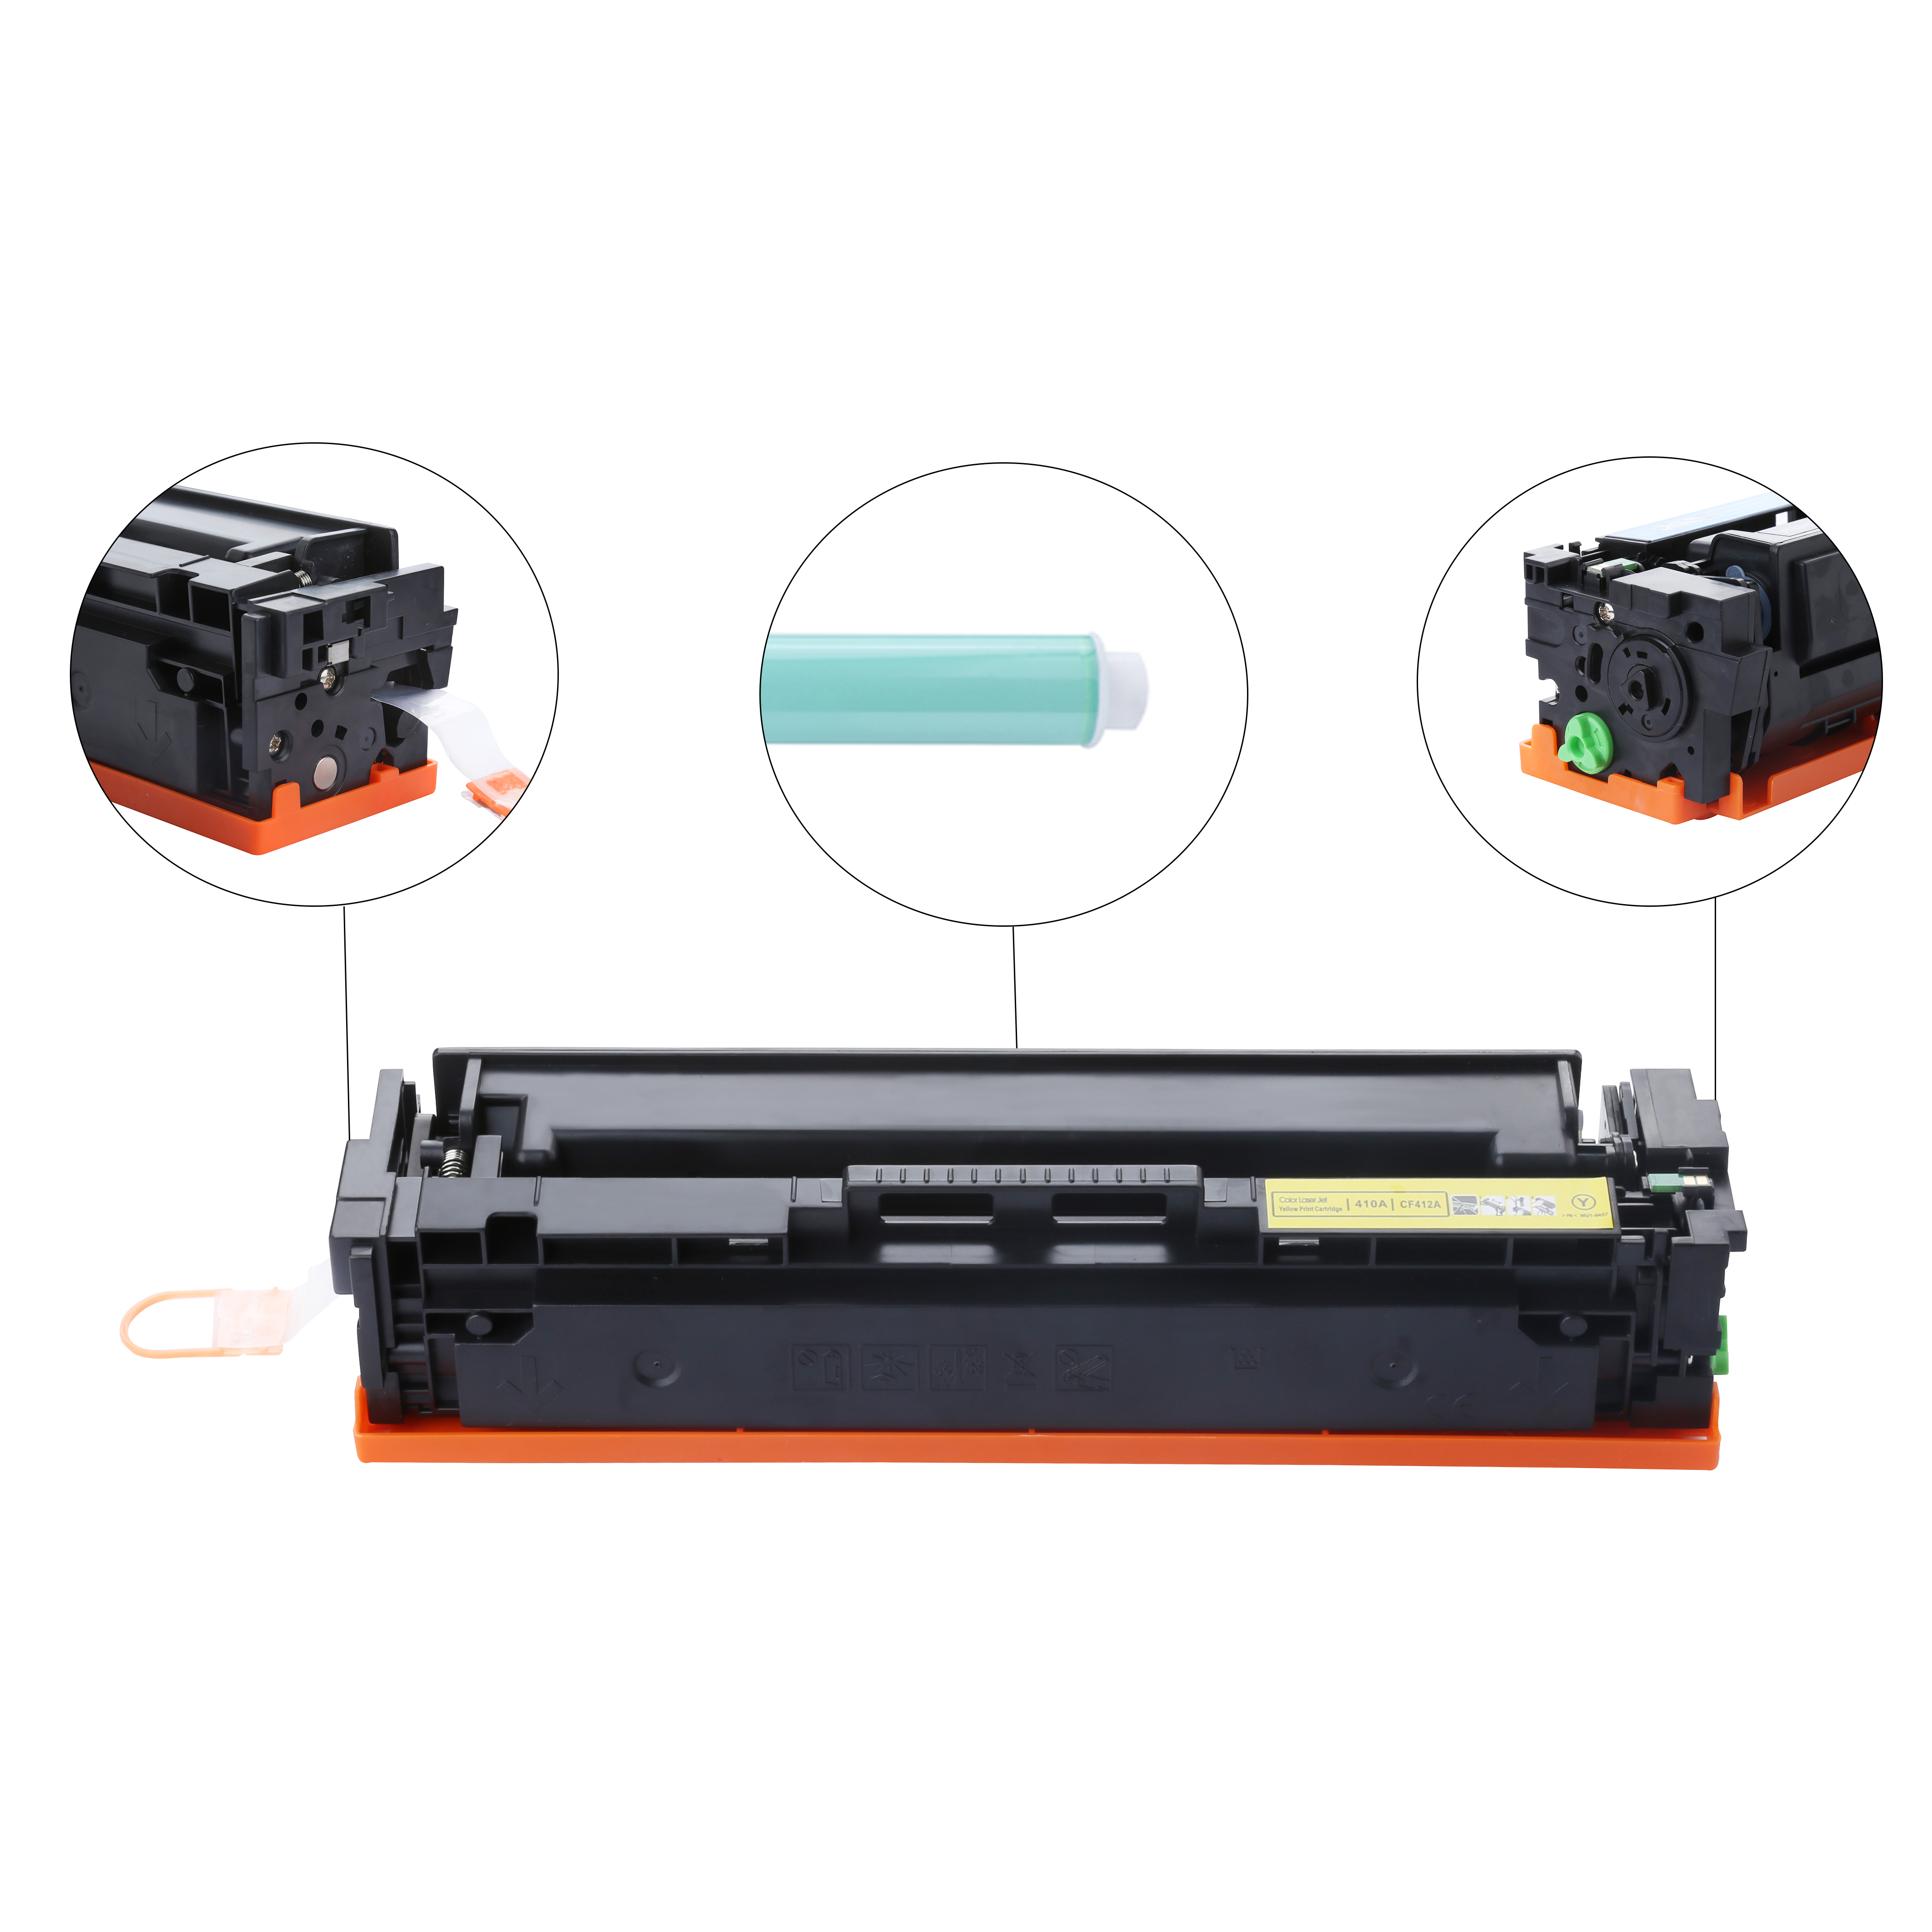 BABSON Compatible HP 410A CF410A High Yield Toner Cartridge use for HP Color LaserJet Pro MFP M477fdn, M477fdw, M477fnw, M452dn, M452nw, M452dw, M377dw Printers, 1 Pack(Black)